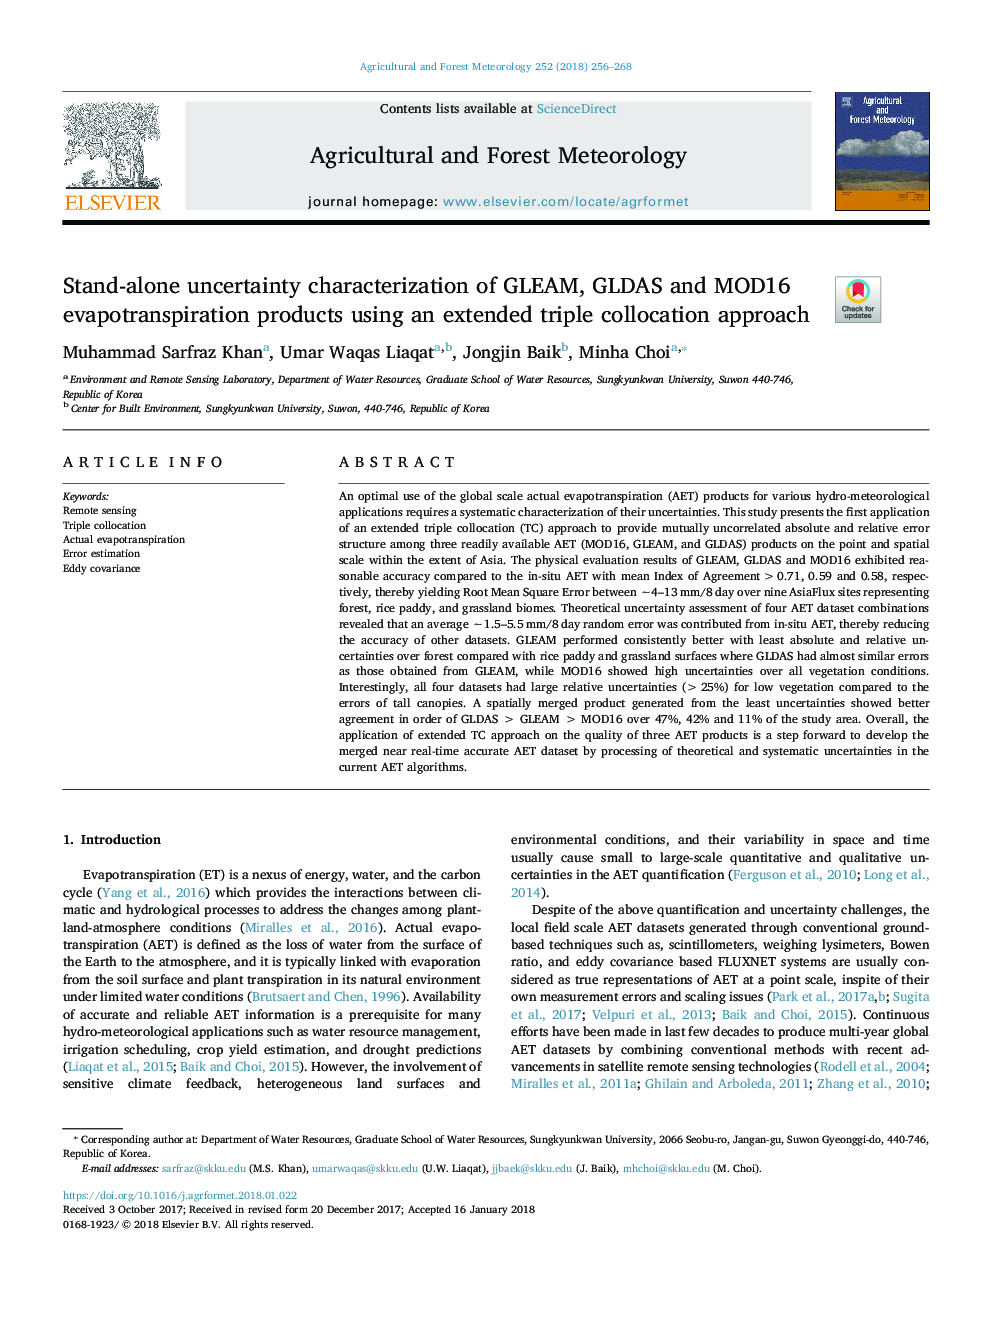 Stand-alone uncertainty characterization of GLEAM, GLDAS and MOD16 evapotranspiration products using an extended triple collocation approach